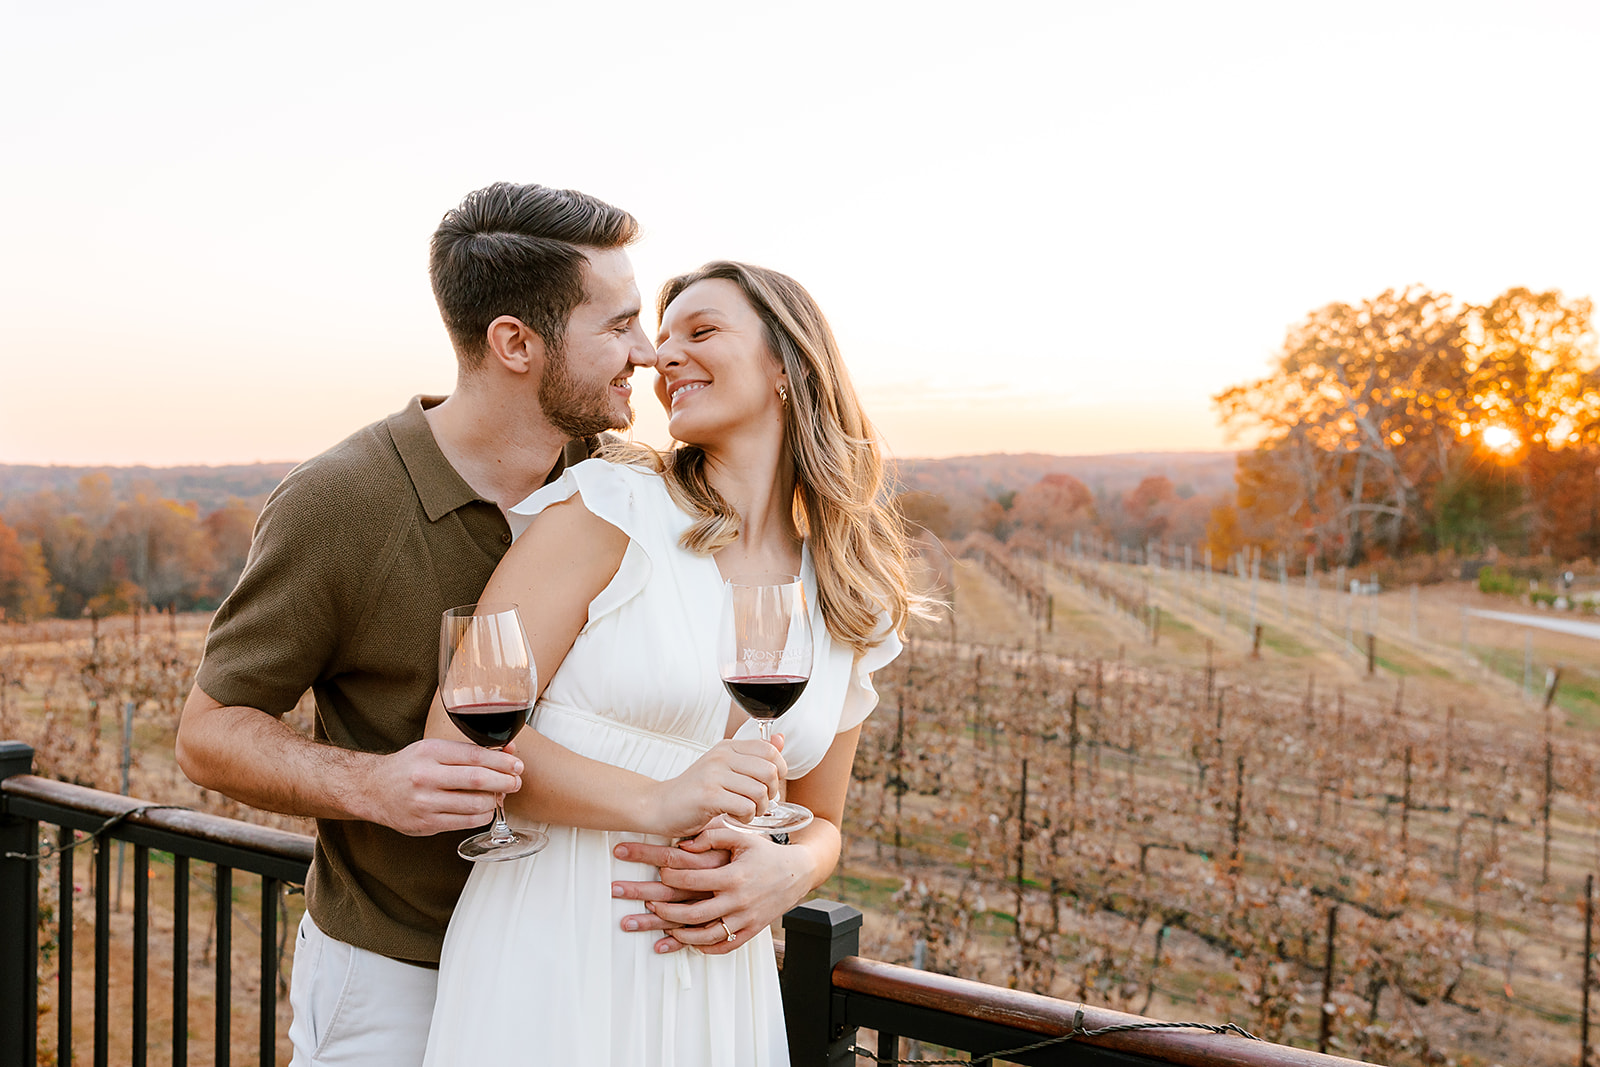 montaluce winery engagement, italian inspired in north georgia, fun candid tuscany vibes engagement photos red wine